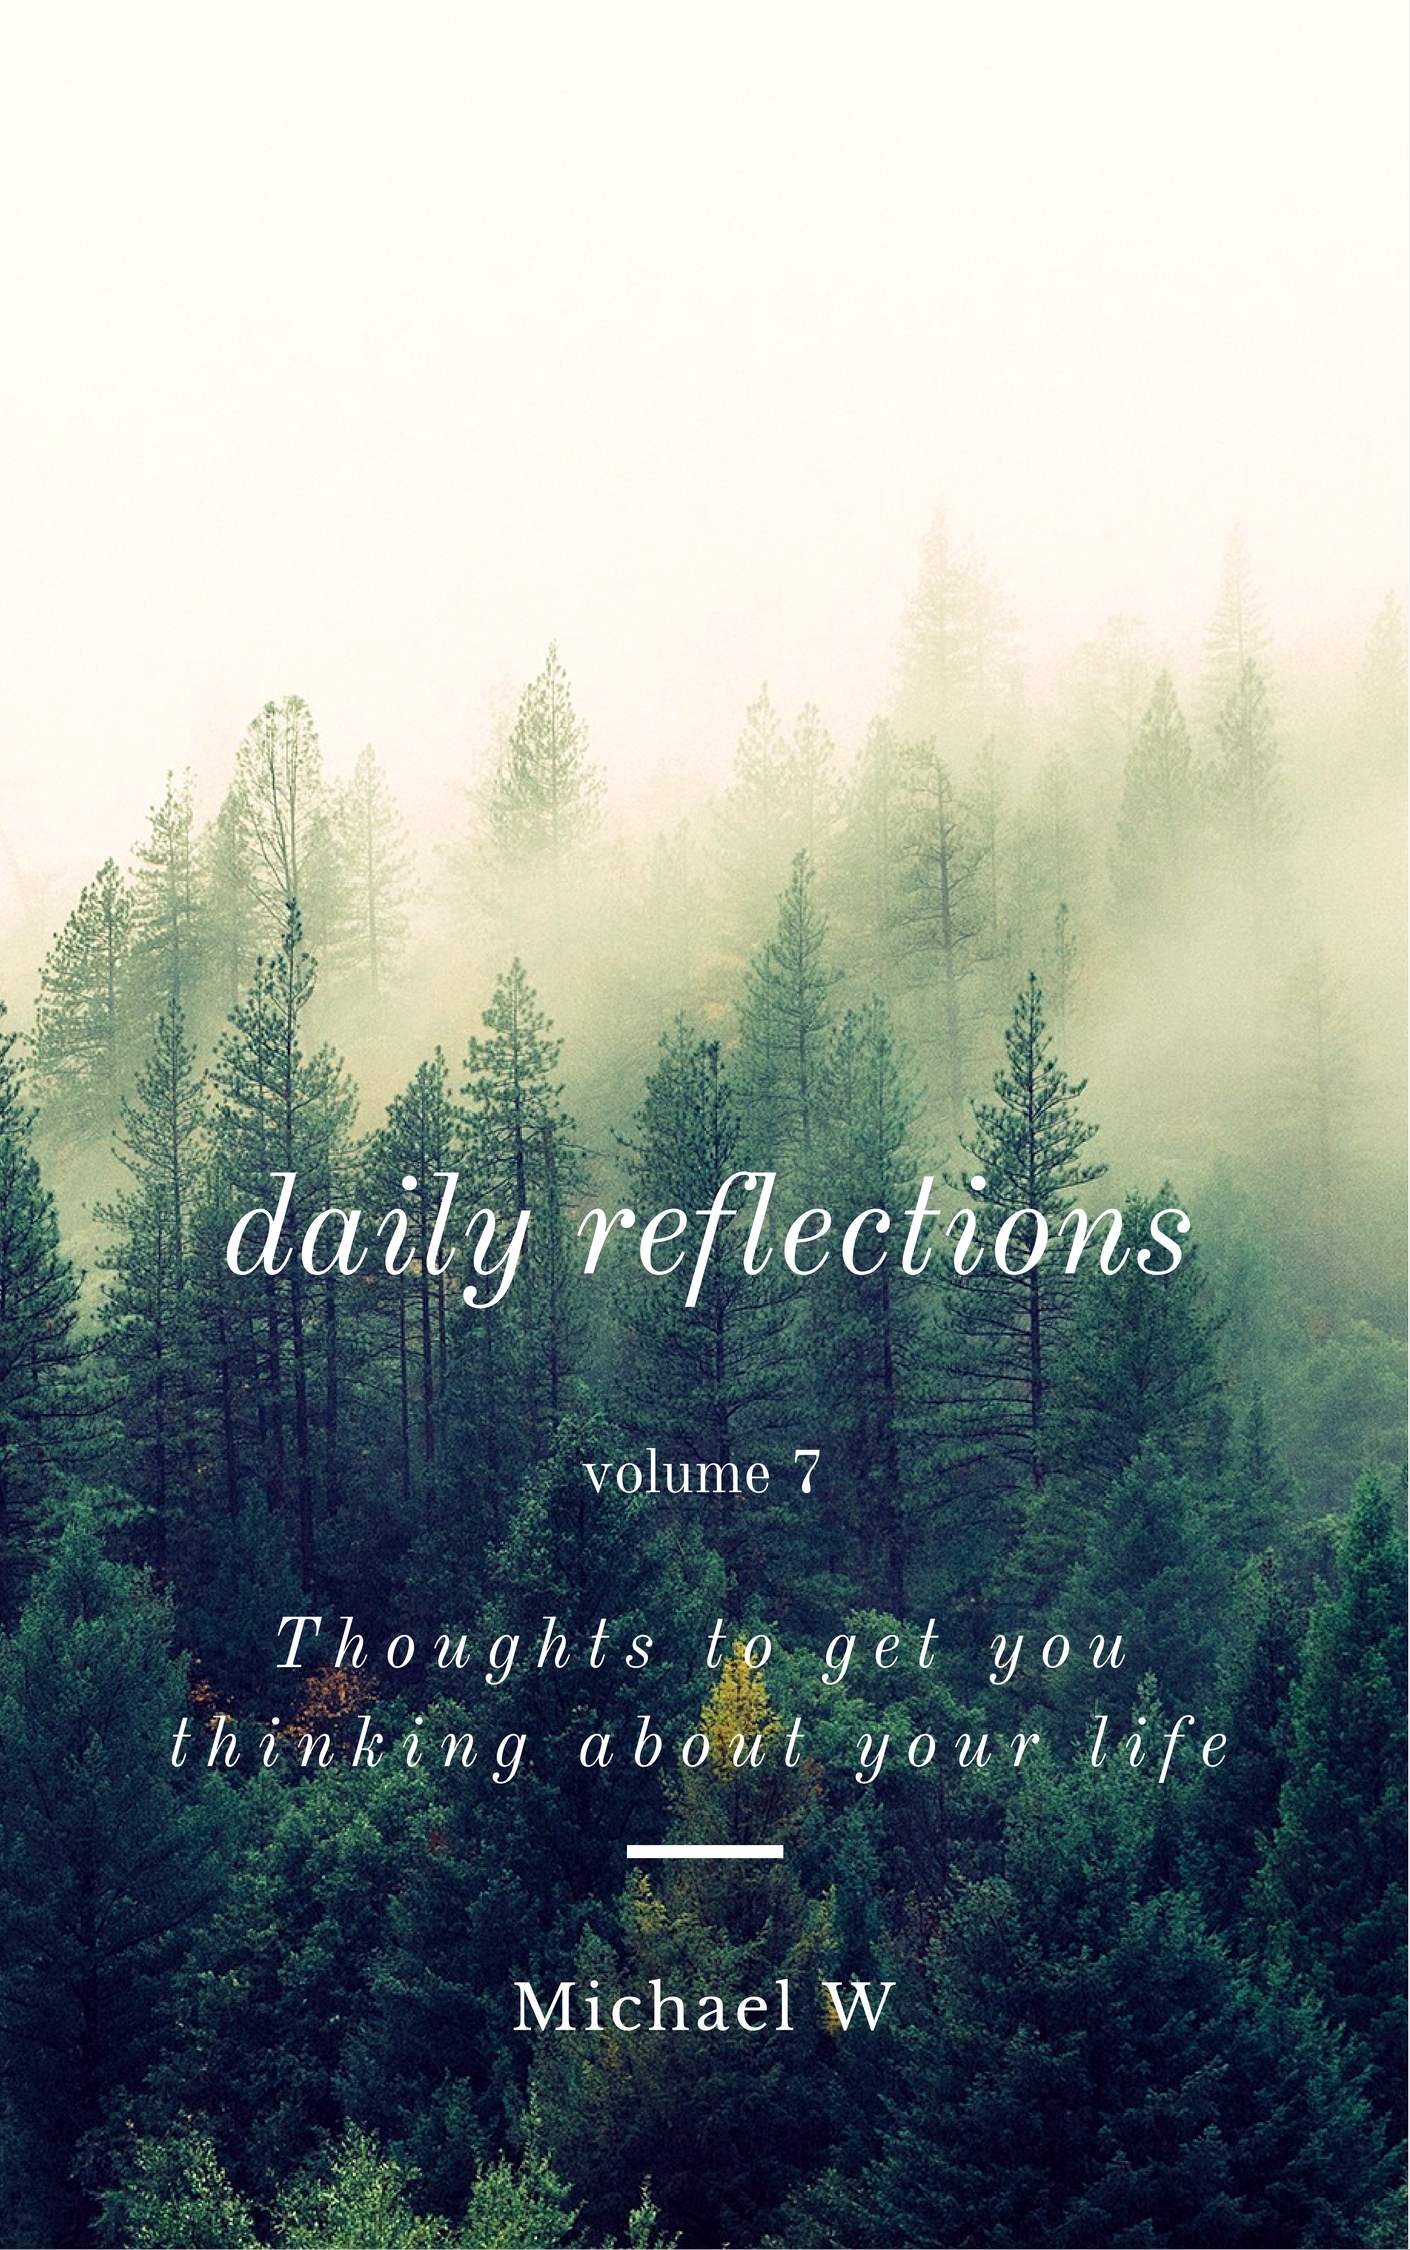 Daily reflections volume 7